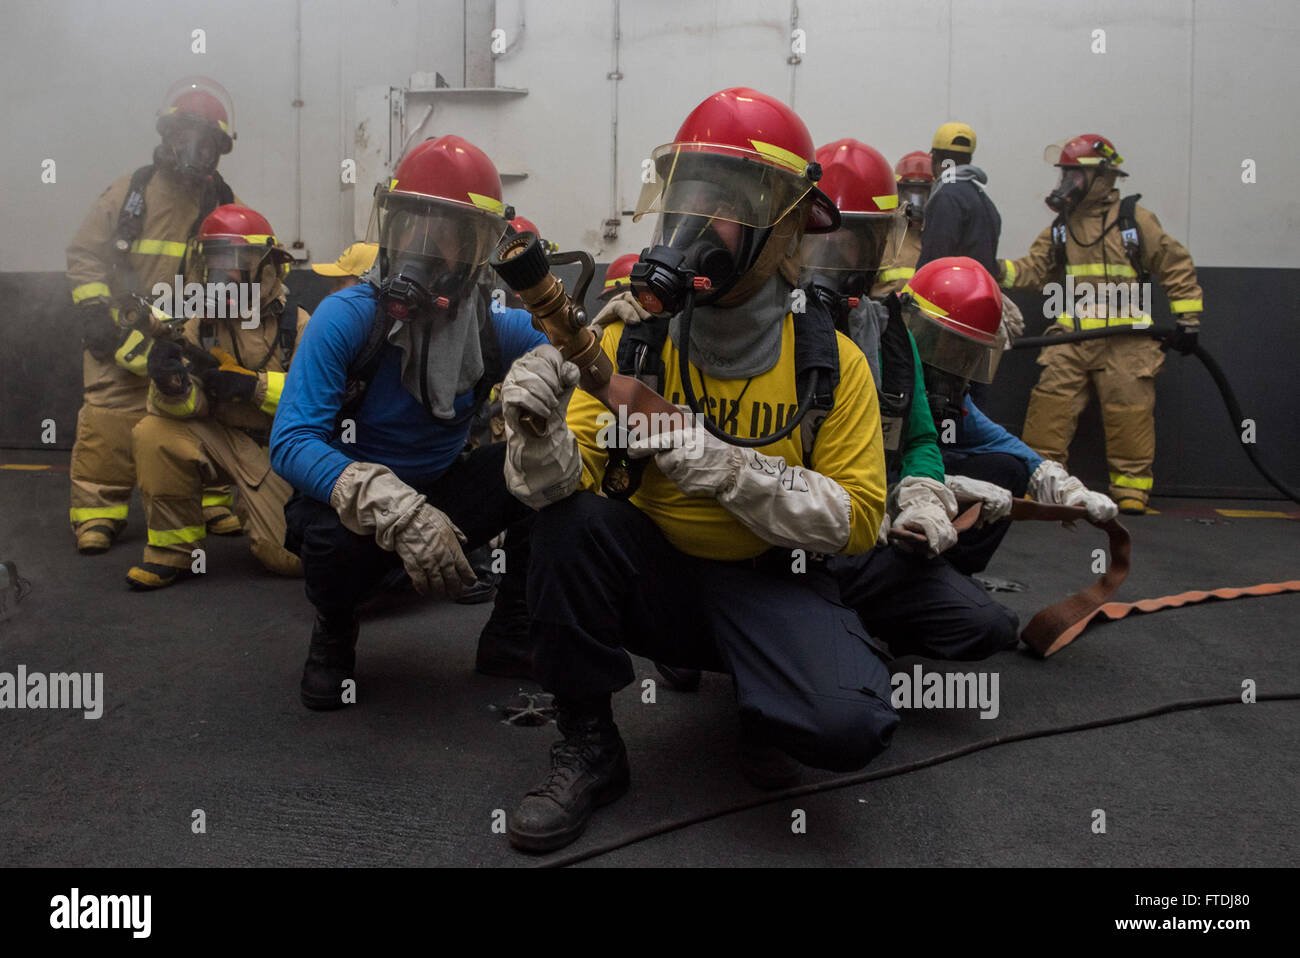 151128-N-QH848-038  ATLANTIC OCEAN (Nov. 28, 2015) Sailors fight a simulated fire during a general quarters drill in the hangar bay of aircraft carrier USS Harry S. Truman (CVN 75). GQ drills prepare Sailors to be at the highest state of readiness in the event of an emergency. Harry S. Truman Carrier Strike Group is deployed to support maritime security operations and theater security cooperation efforts in the U.S. 5th and 6th Fleet areas of operation. (U.S. Navy photo by Mass Communication Specialist 3rd Class A. A. Cruz/Released) Stock Photo